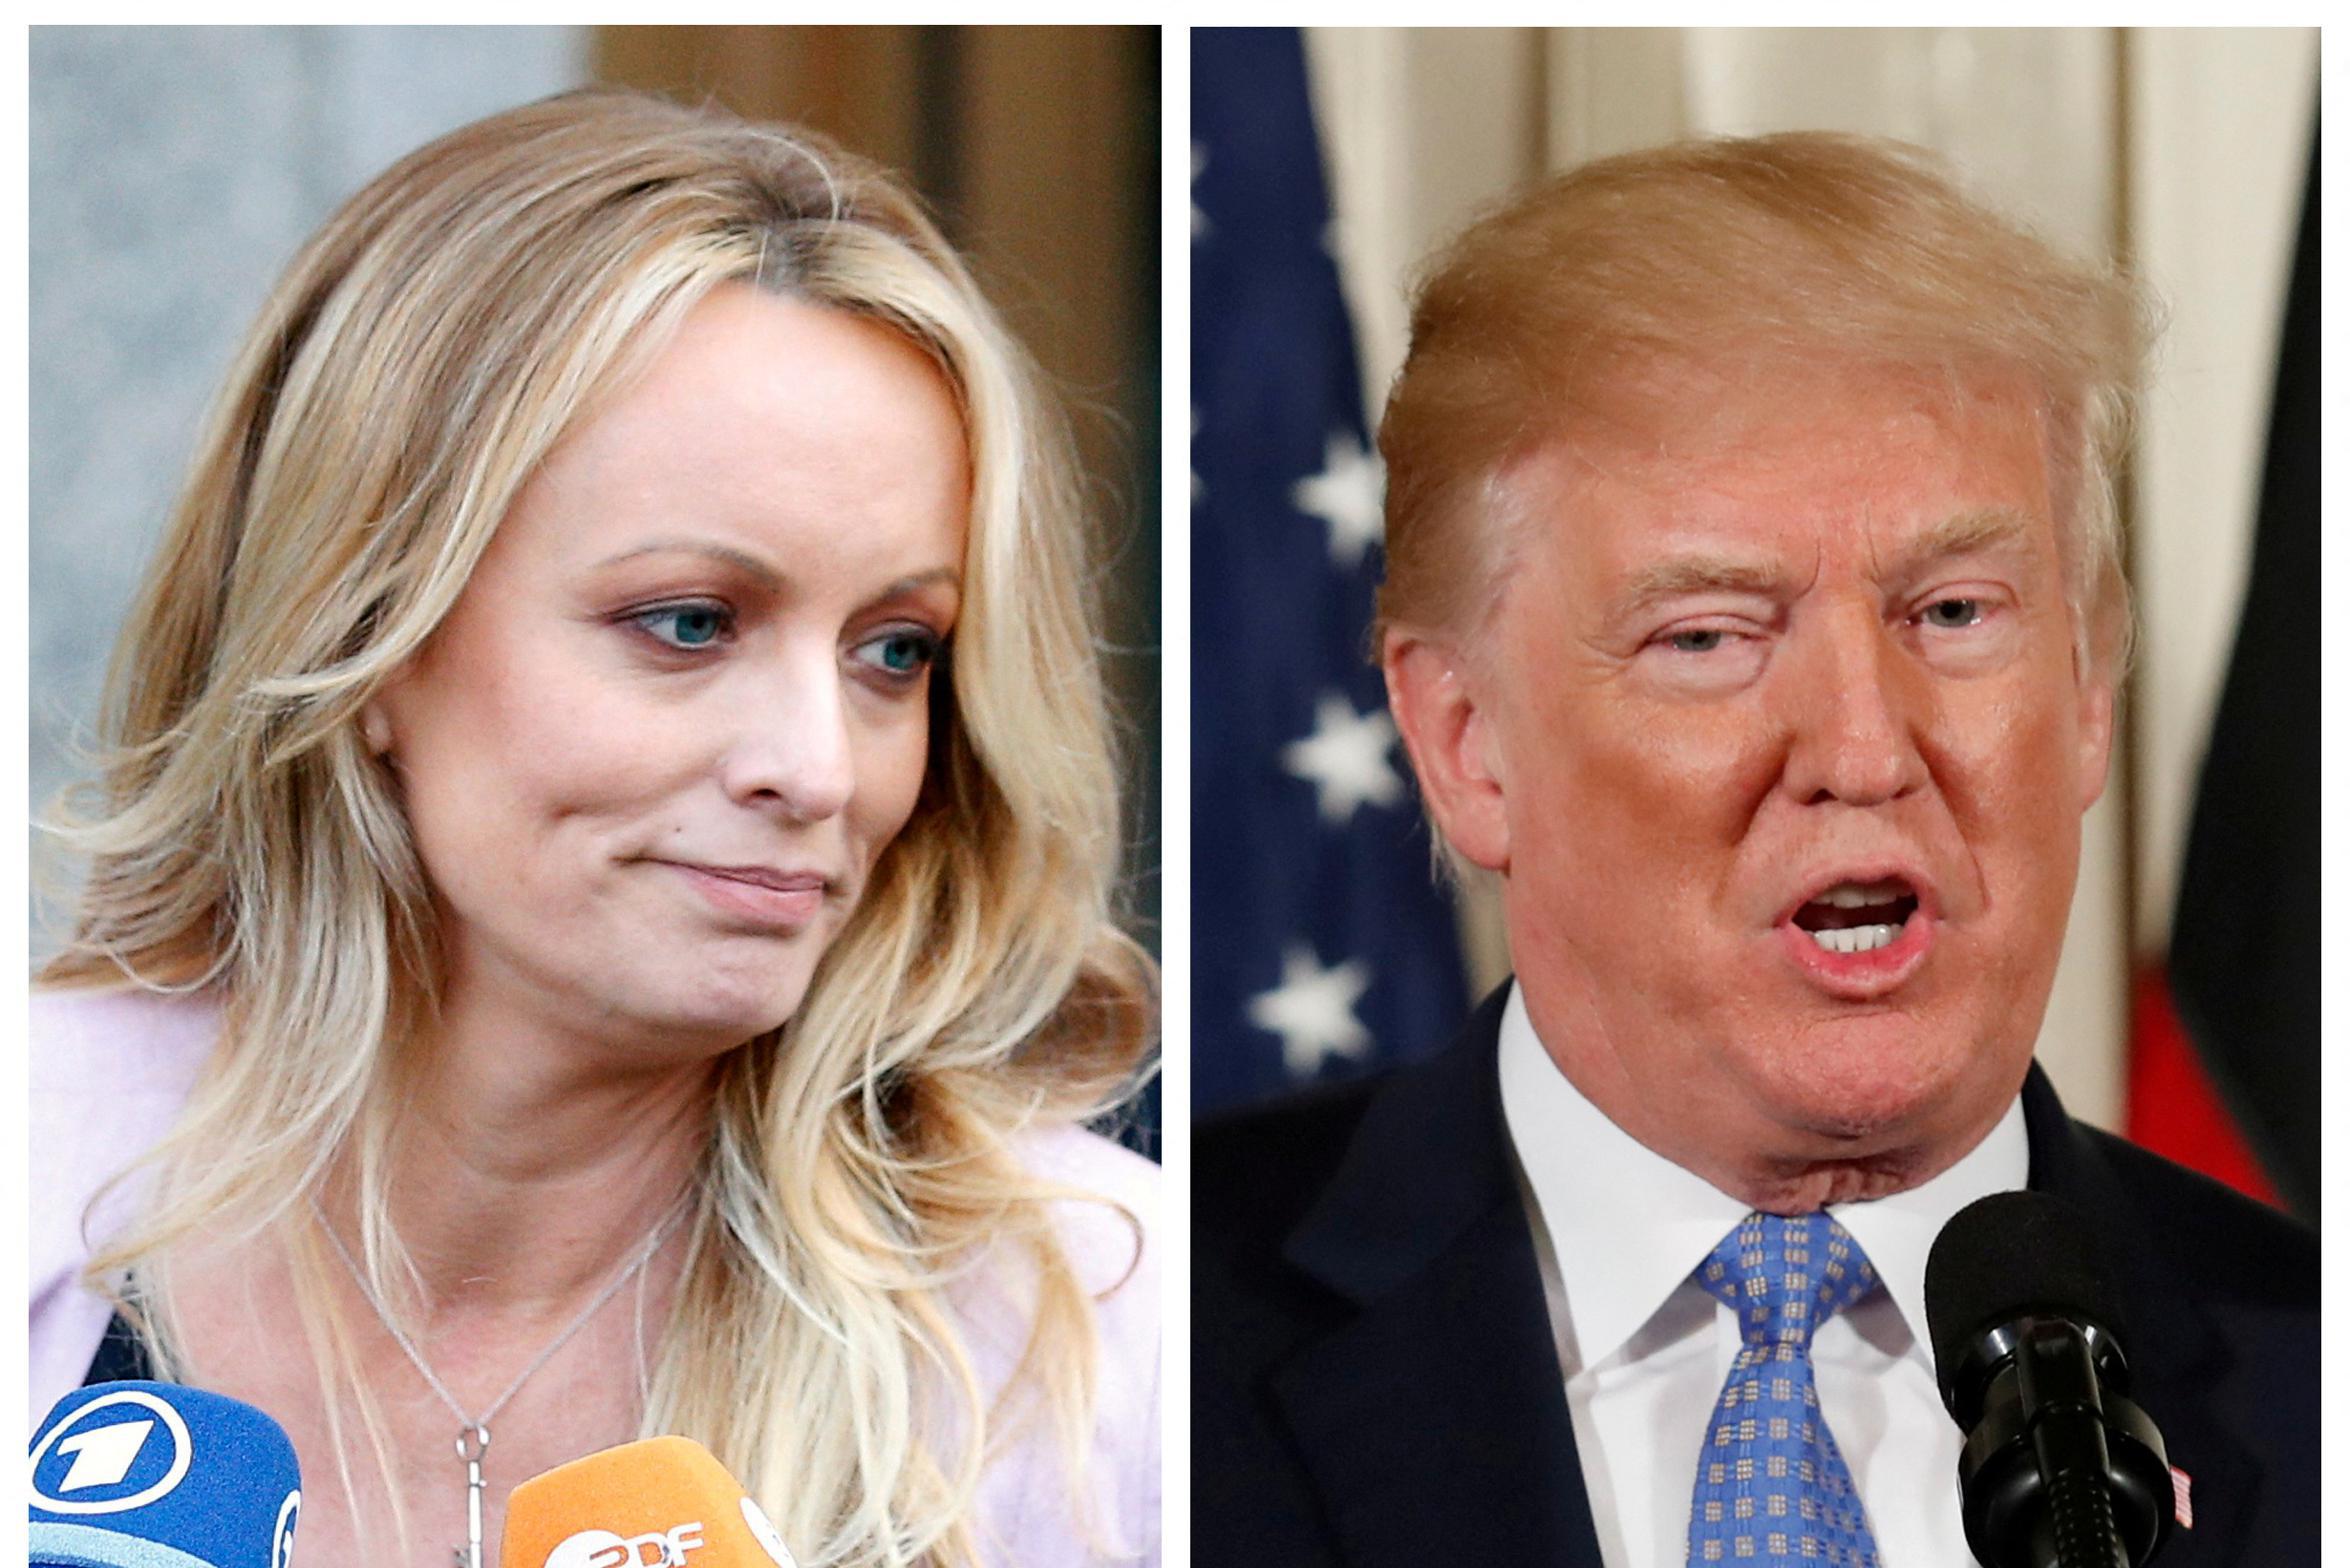 Delay in Criminal Case Against Donald Trump for Payment of Hush Money to Stormy Daniels